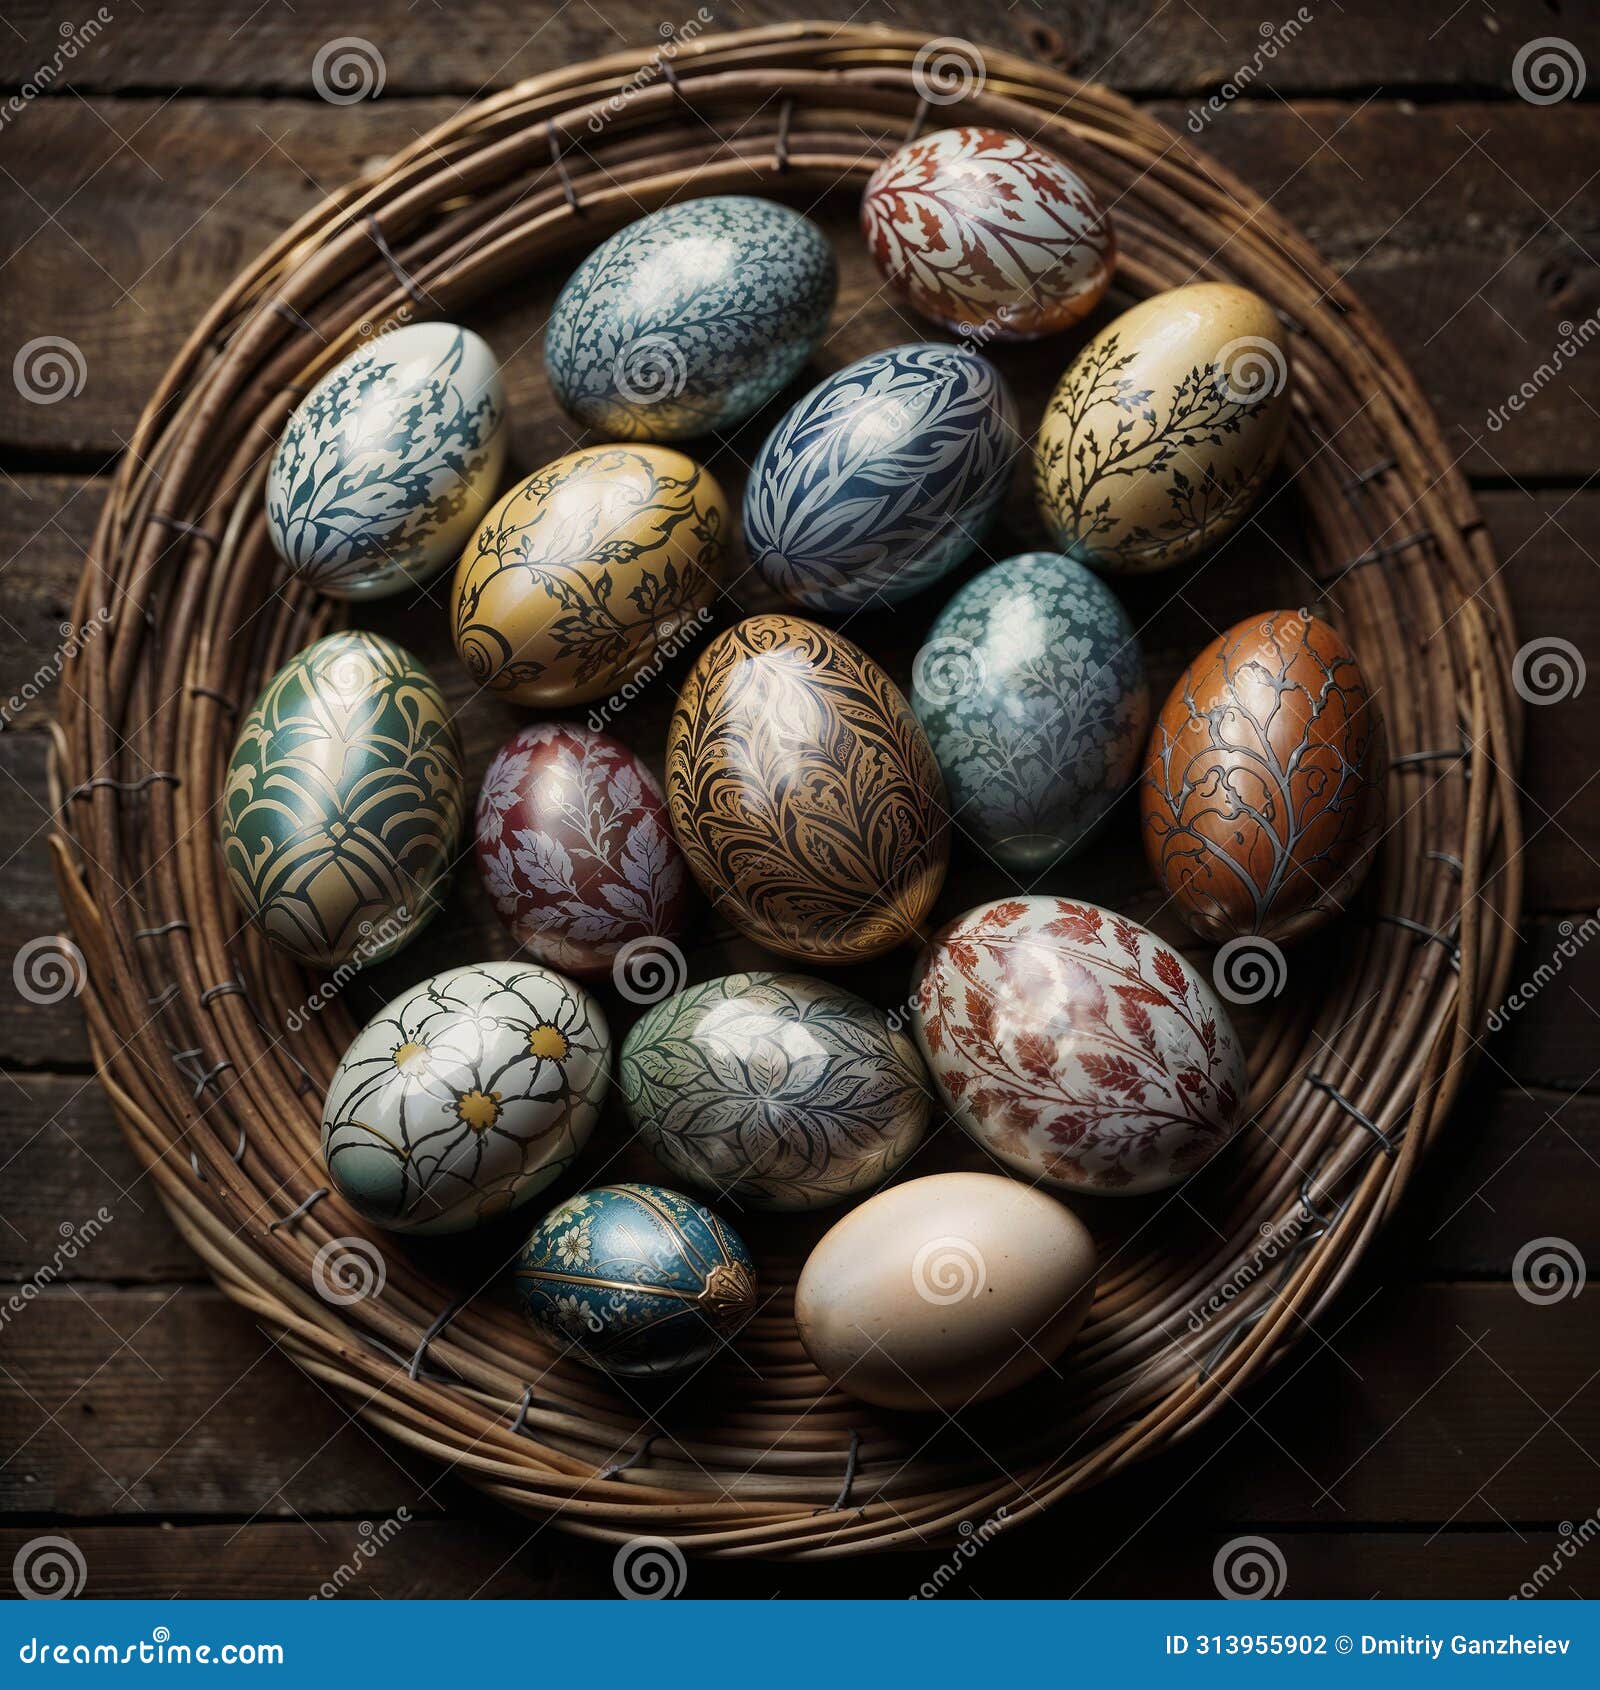 the dissimilarity of the ornamental style of decorating easter eggs